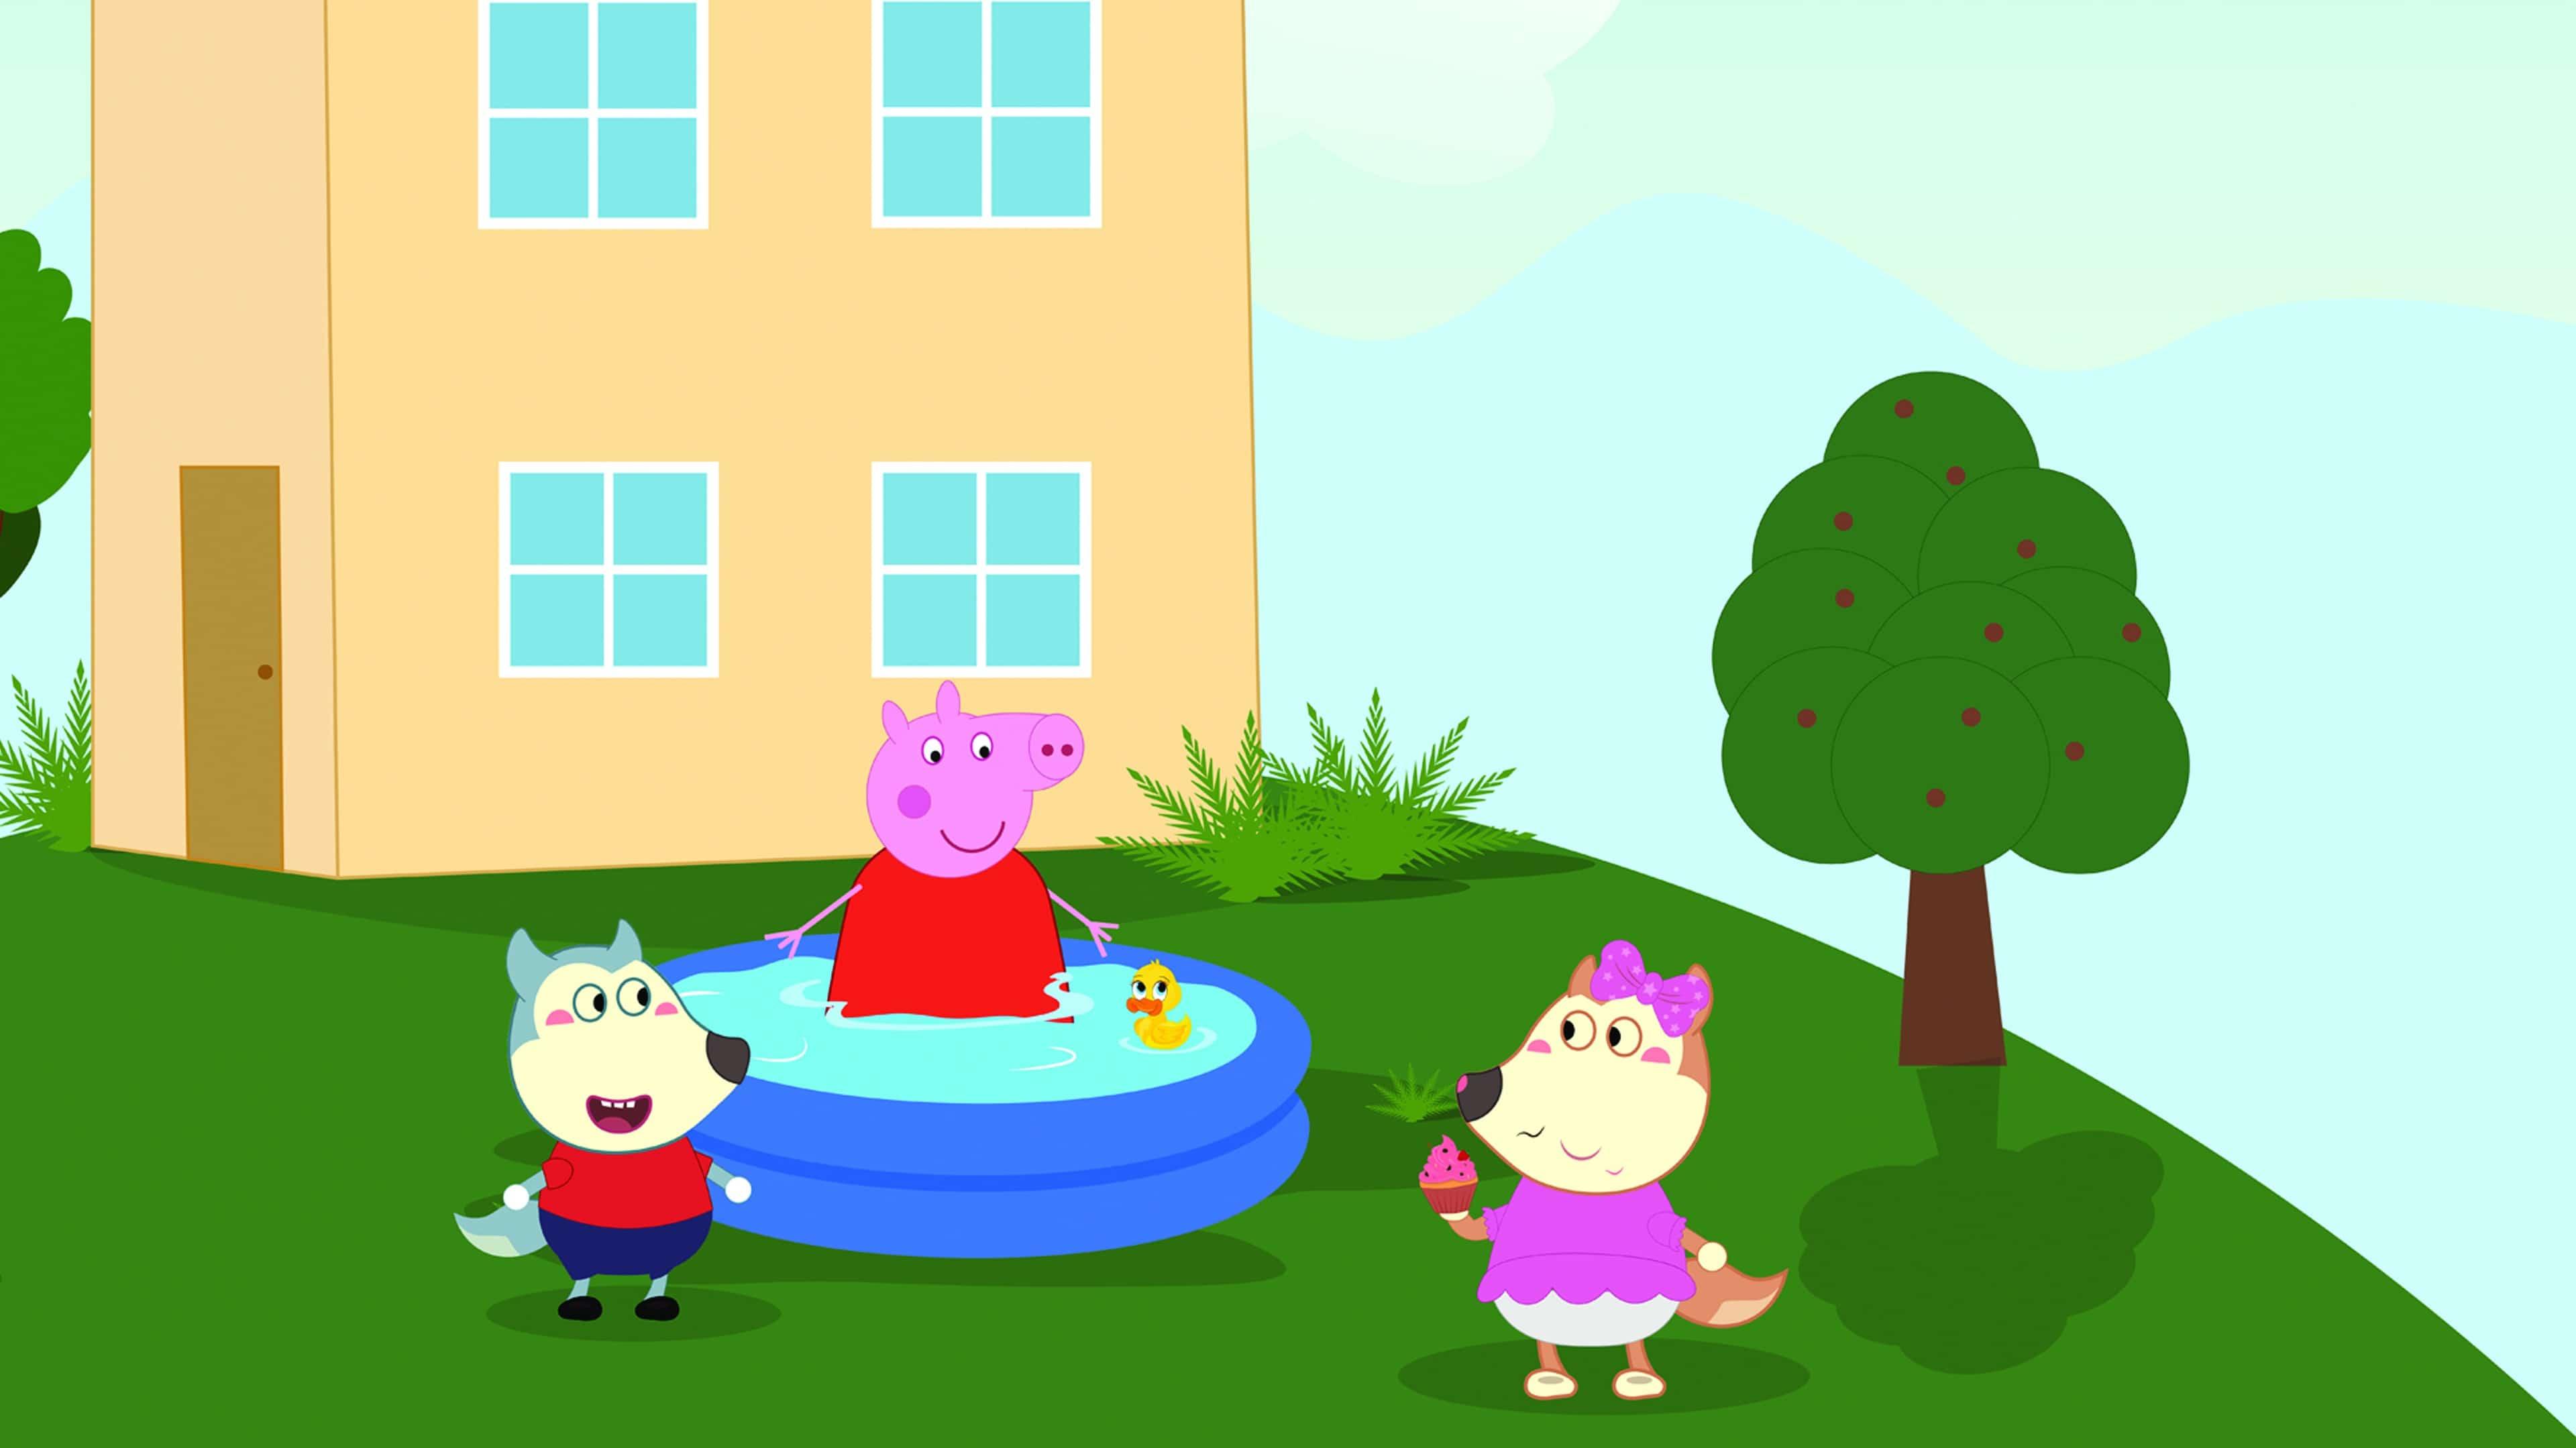 HD Peppa Pig House Wallpaper Pc And Mobile